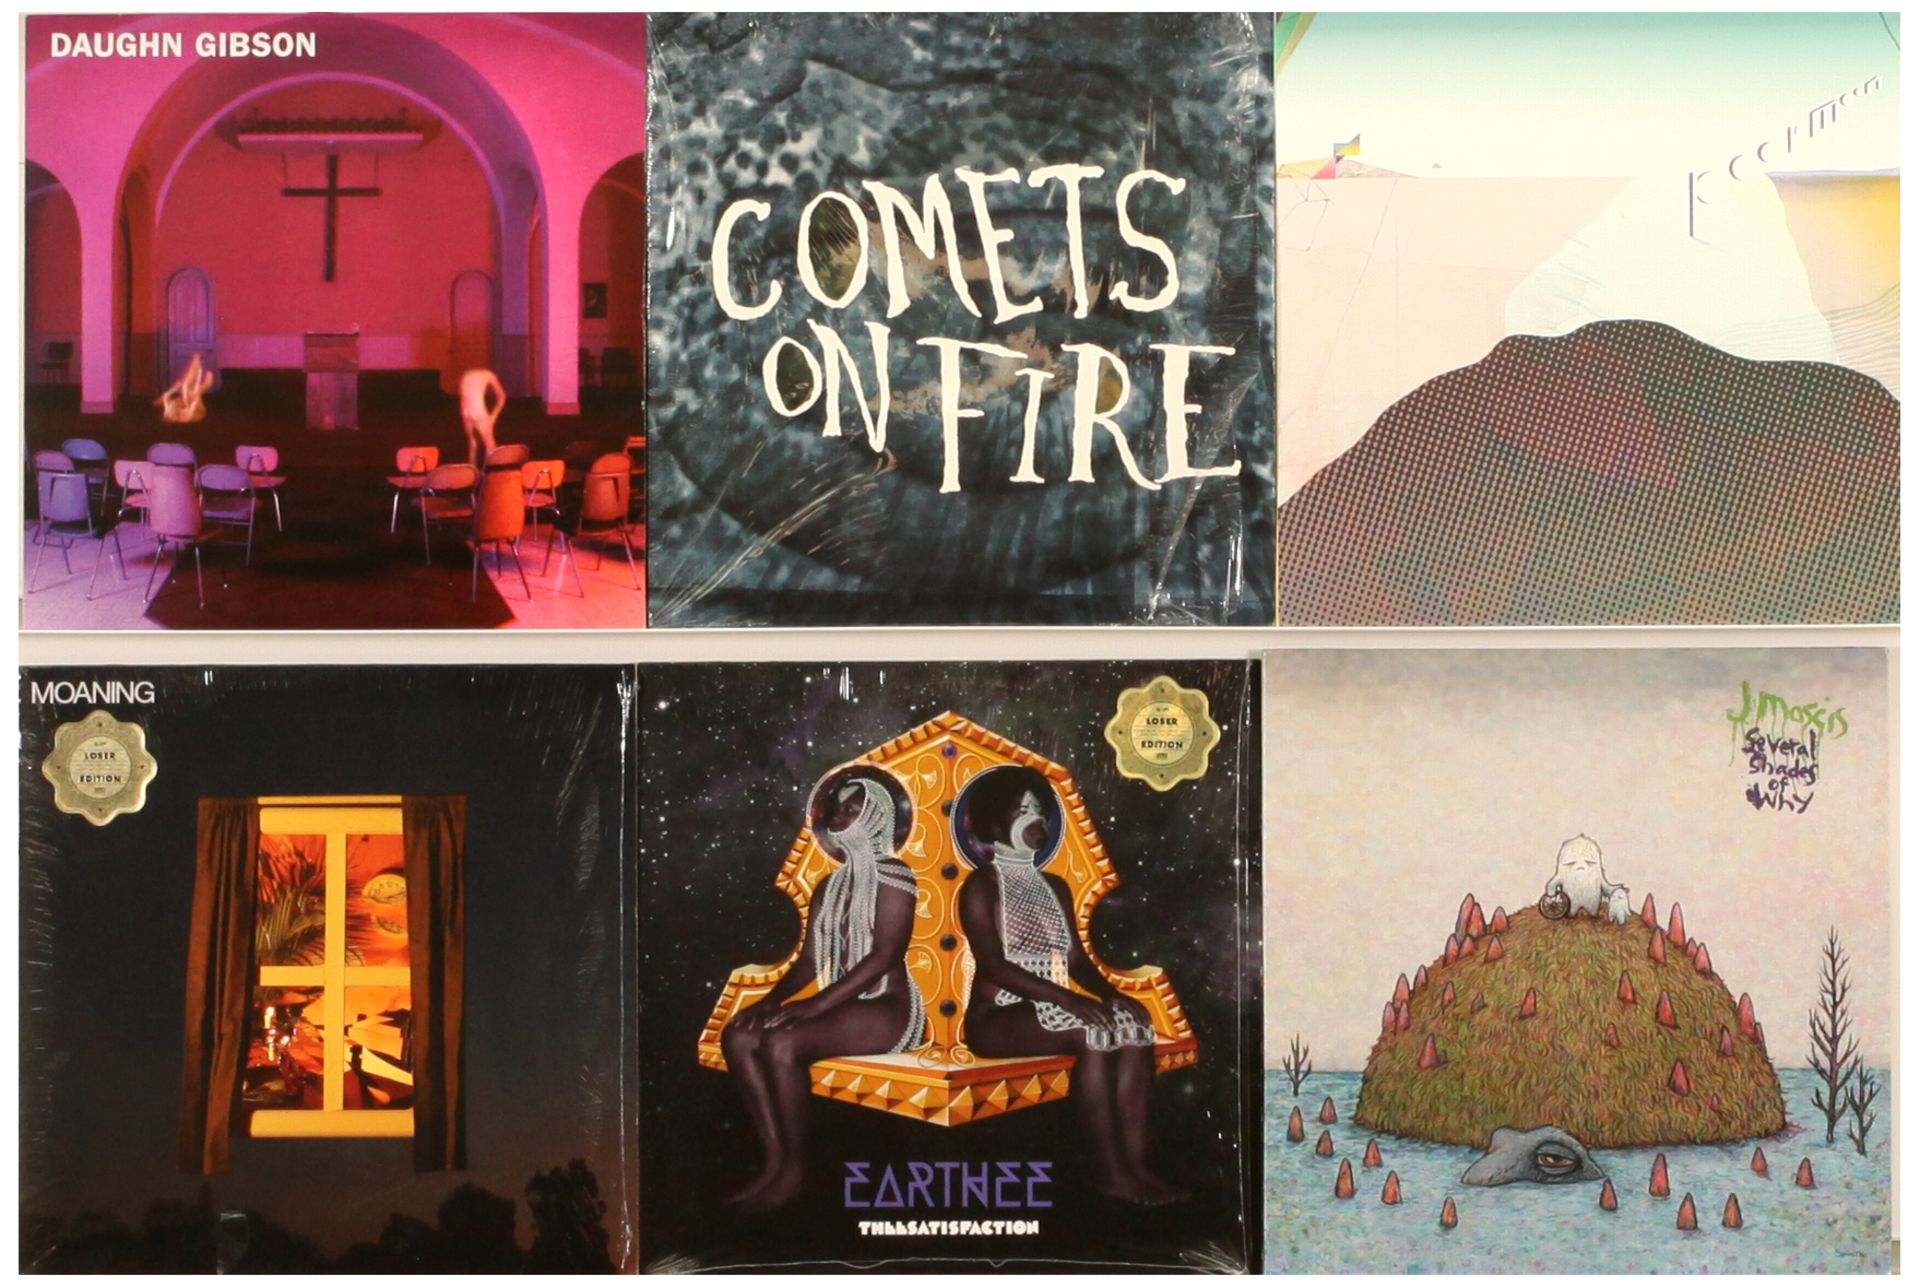 Sub-Pop Artists Vinyl Albums - Comets On Fire, Moaning and Poor Moon